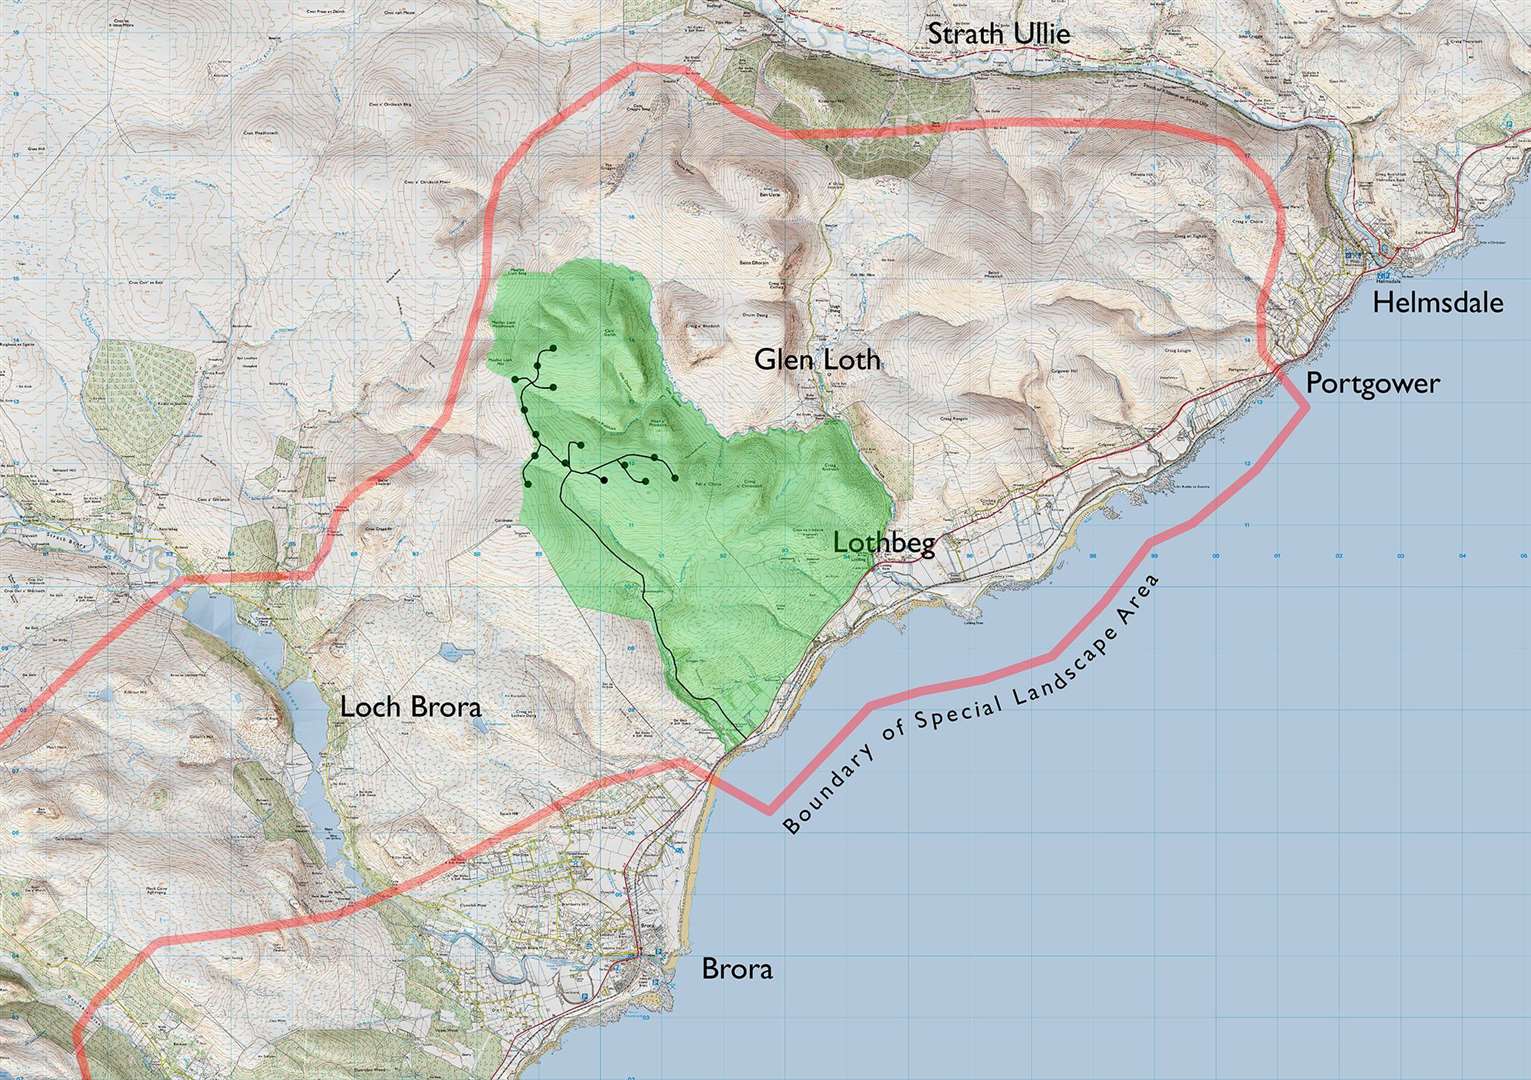 The map shows the boundary of the special landscape area in red and the proposed location of the turbines.